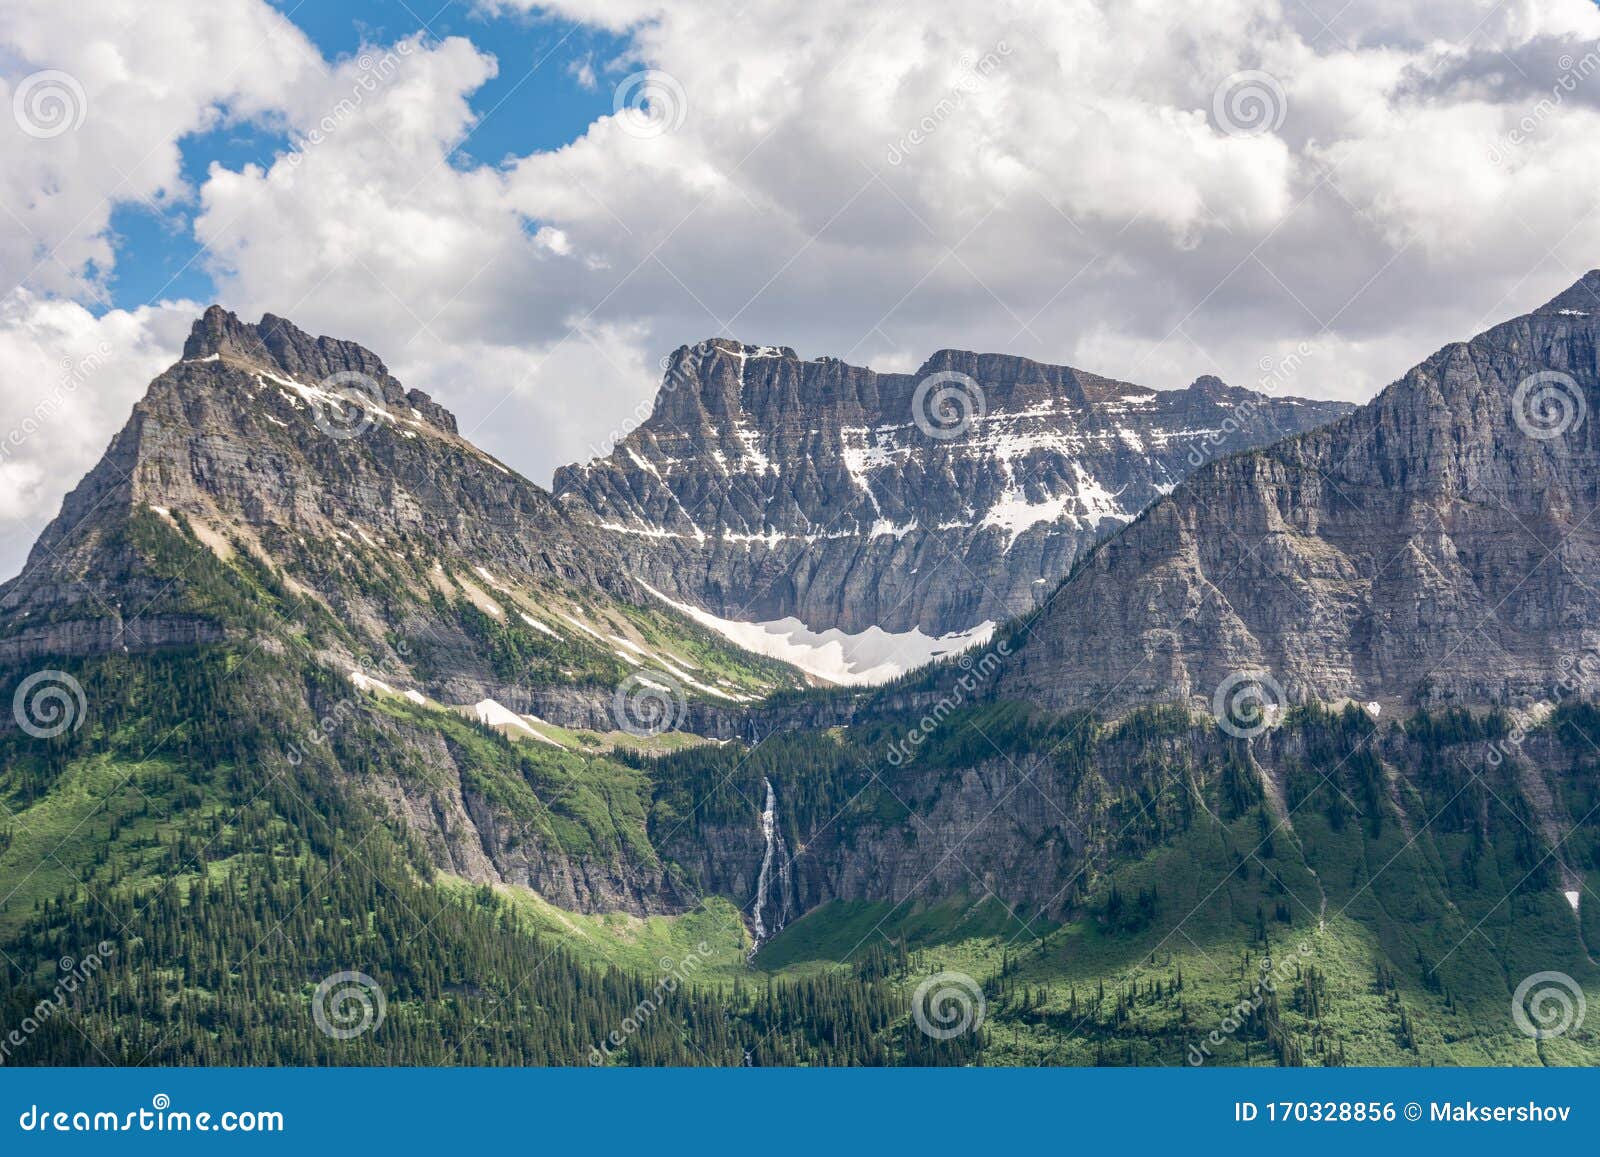 mount cannon is located in the lewis range, glacier national park in the u.s. state of montana